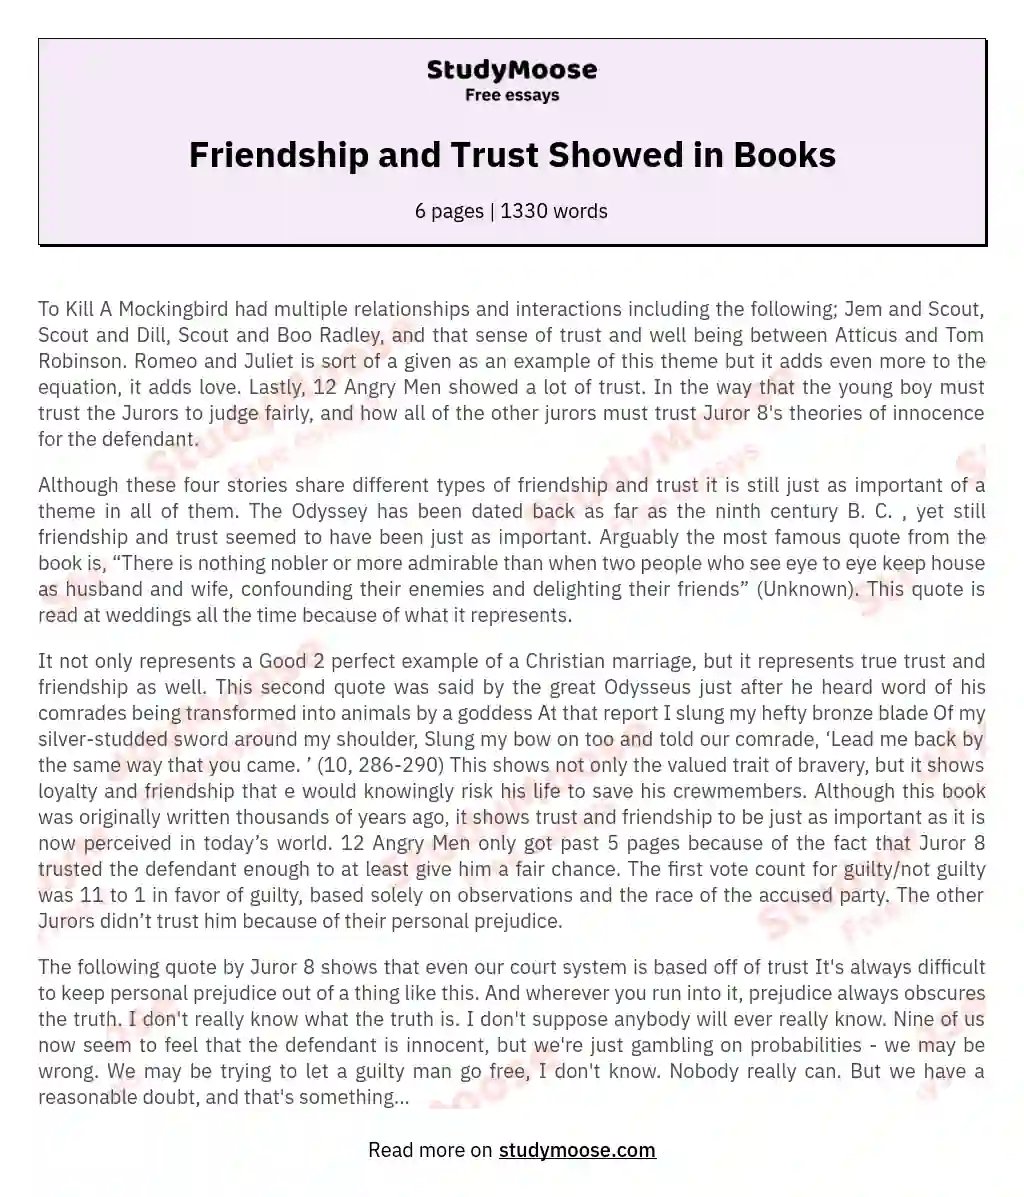 Friendship and Trust Showed in Books essay